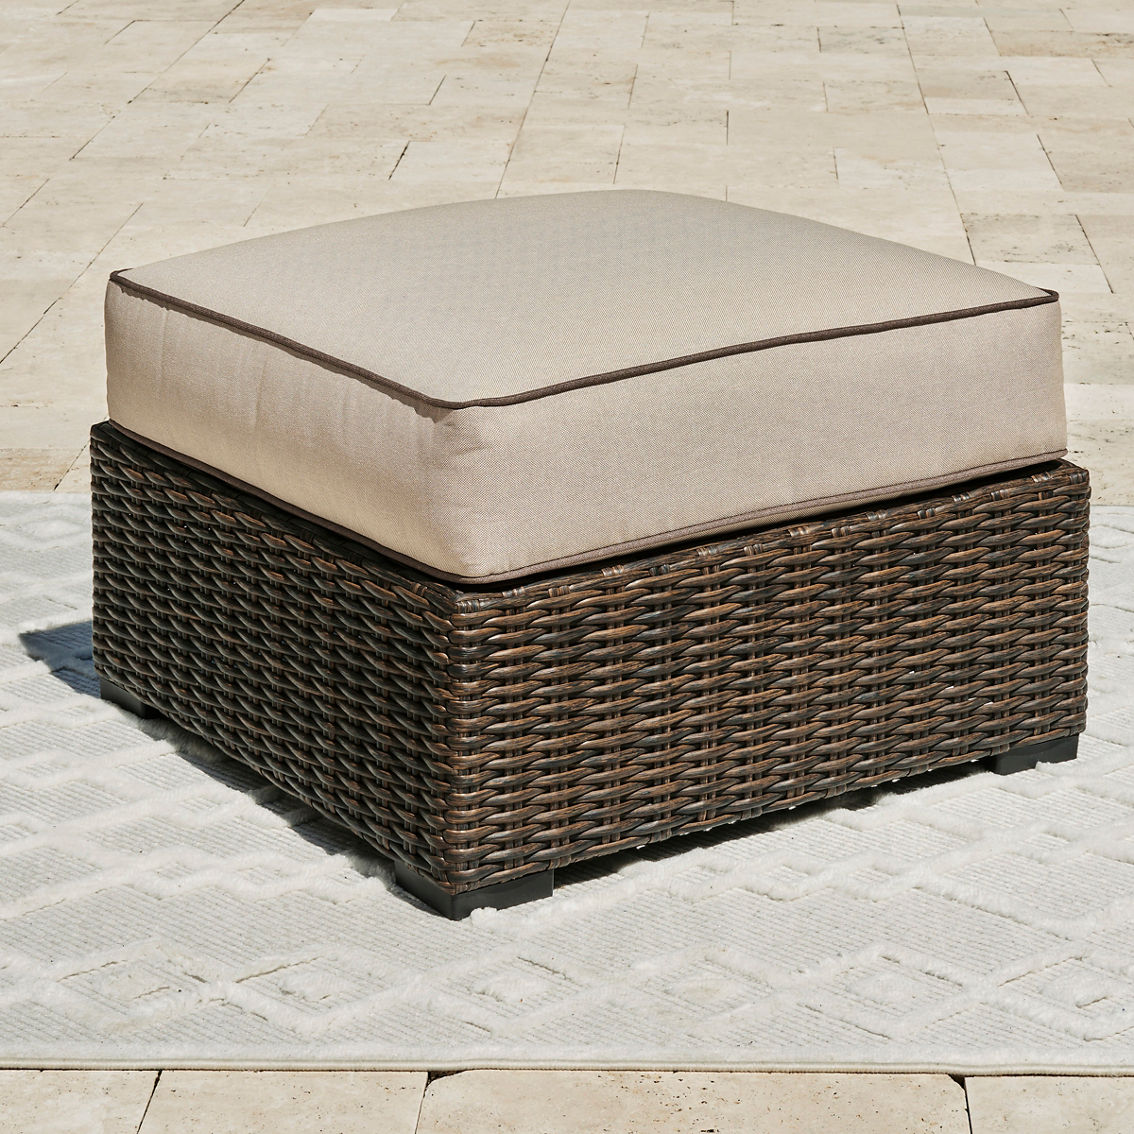 Signature Design by Ashley Coastline Bay Outdoor Ottoman with Cushion - Image 3 of 4